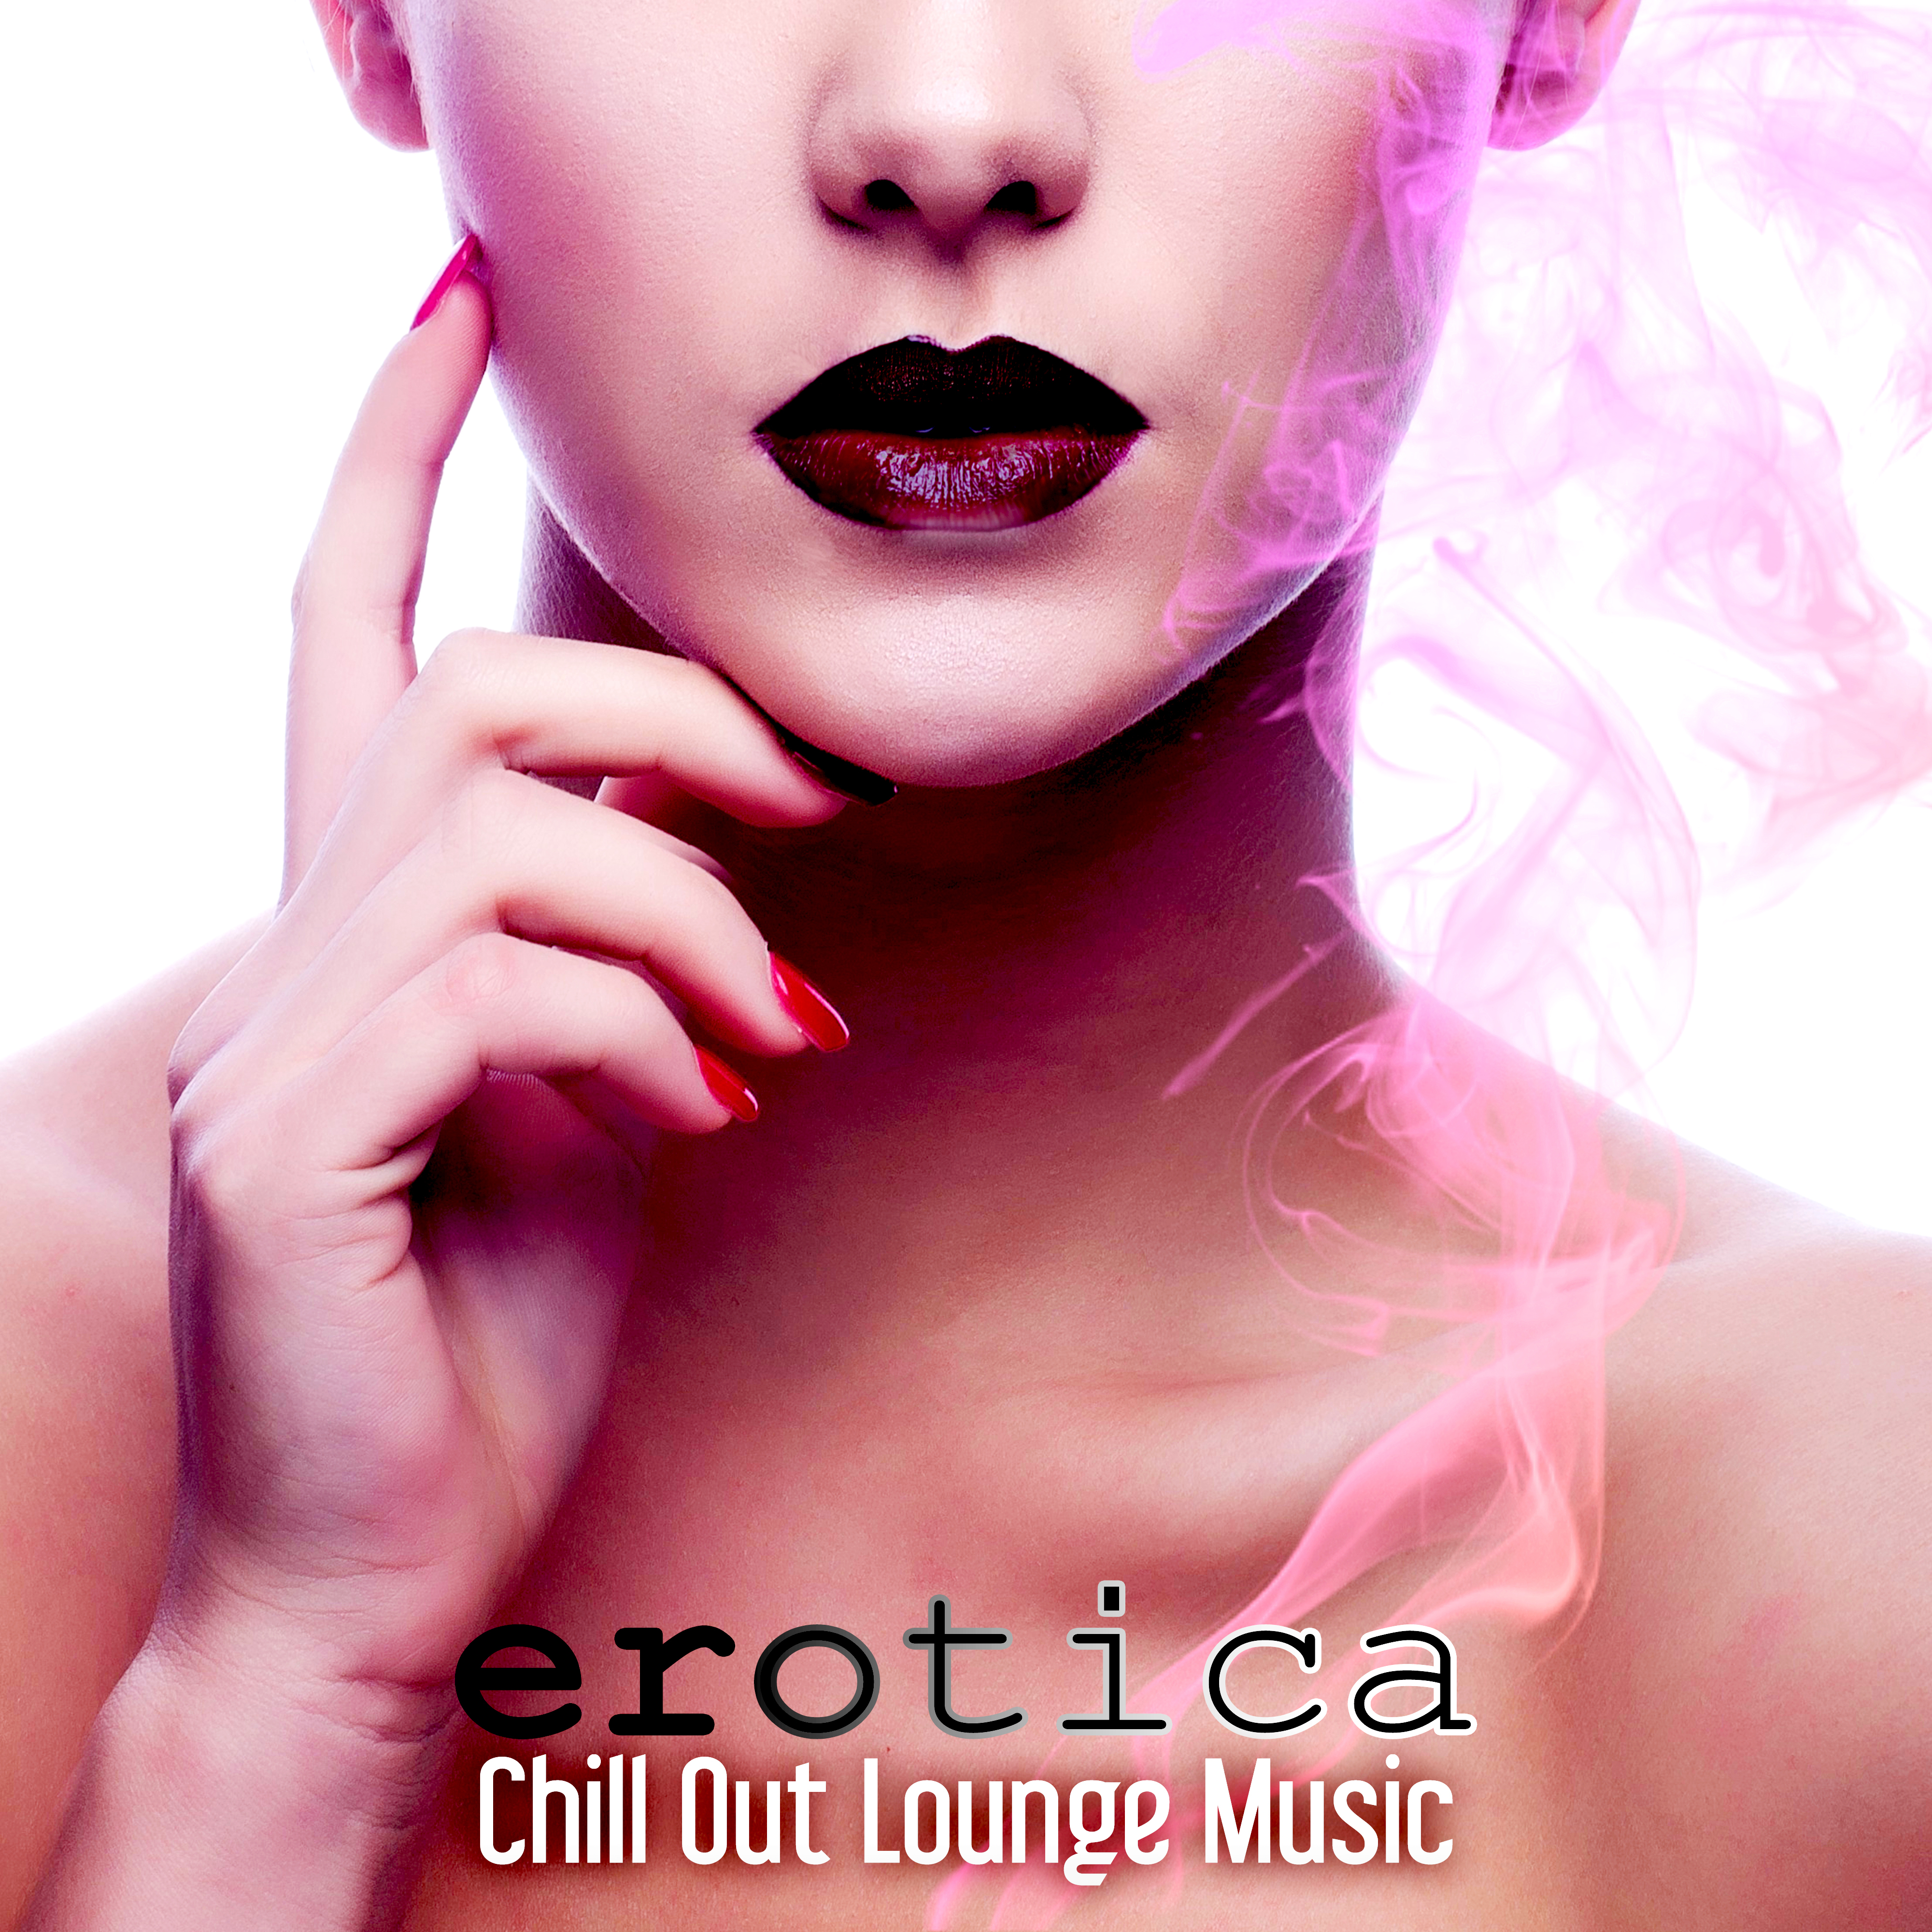 Erotica Chill Out Lounge Music – The Best Electronic Music 2015 for Sensual Massage, Erotica Games, Tantric ***, Making Love, Passion & Sensuality, Erotica Oriental Bar, *** Music